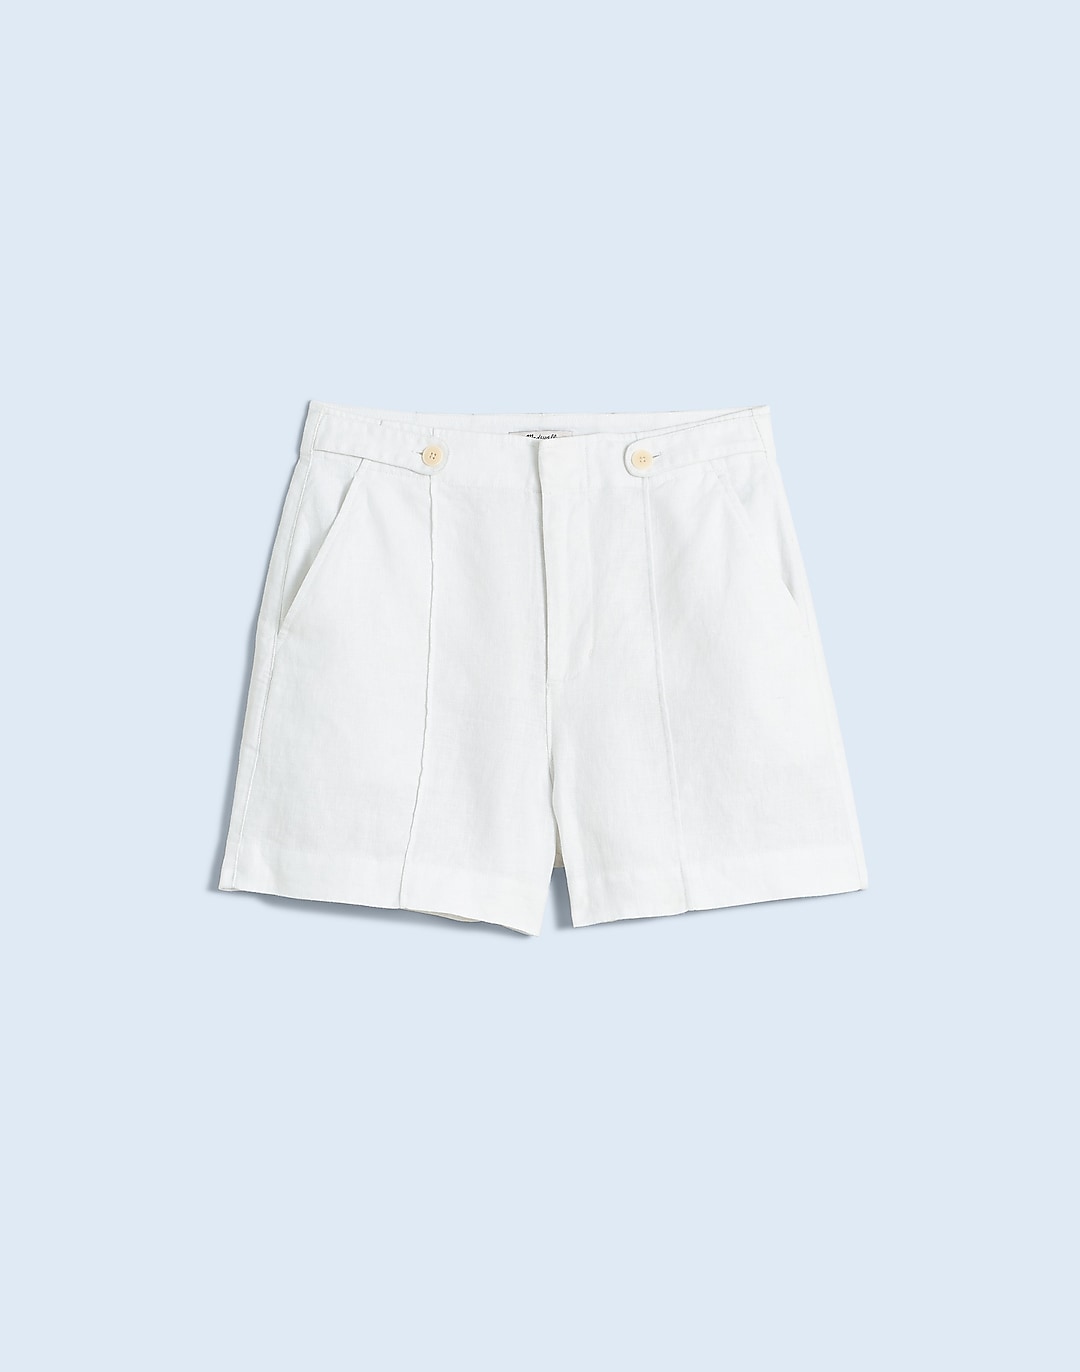 Clean Button-Tab Shorts in 100% Linen | Madewell